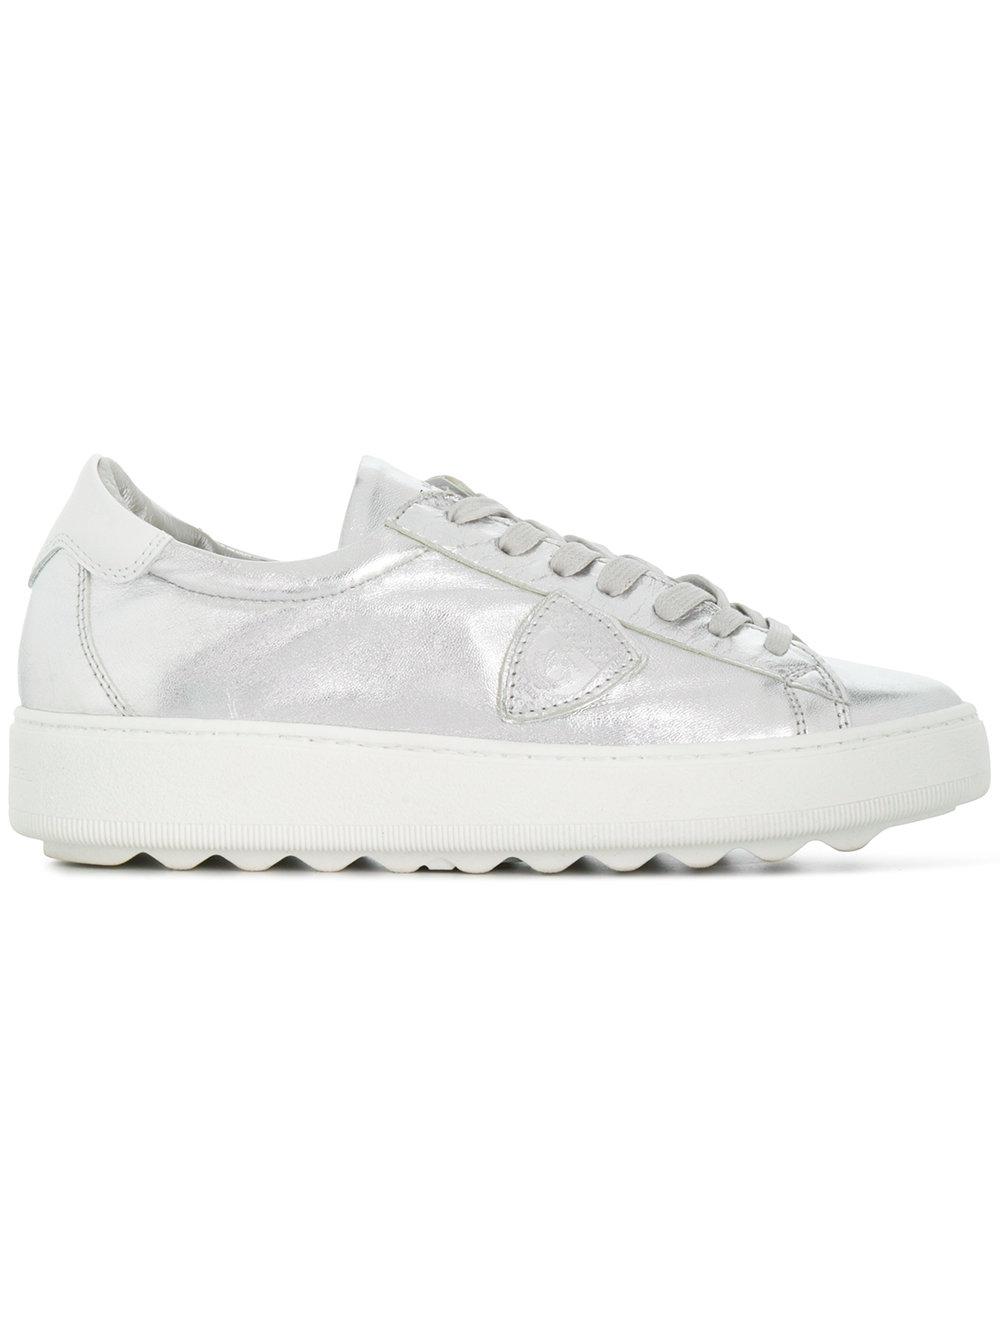 Philippe Model Leather Madeleine Sneakers in Metallic - Lyst